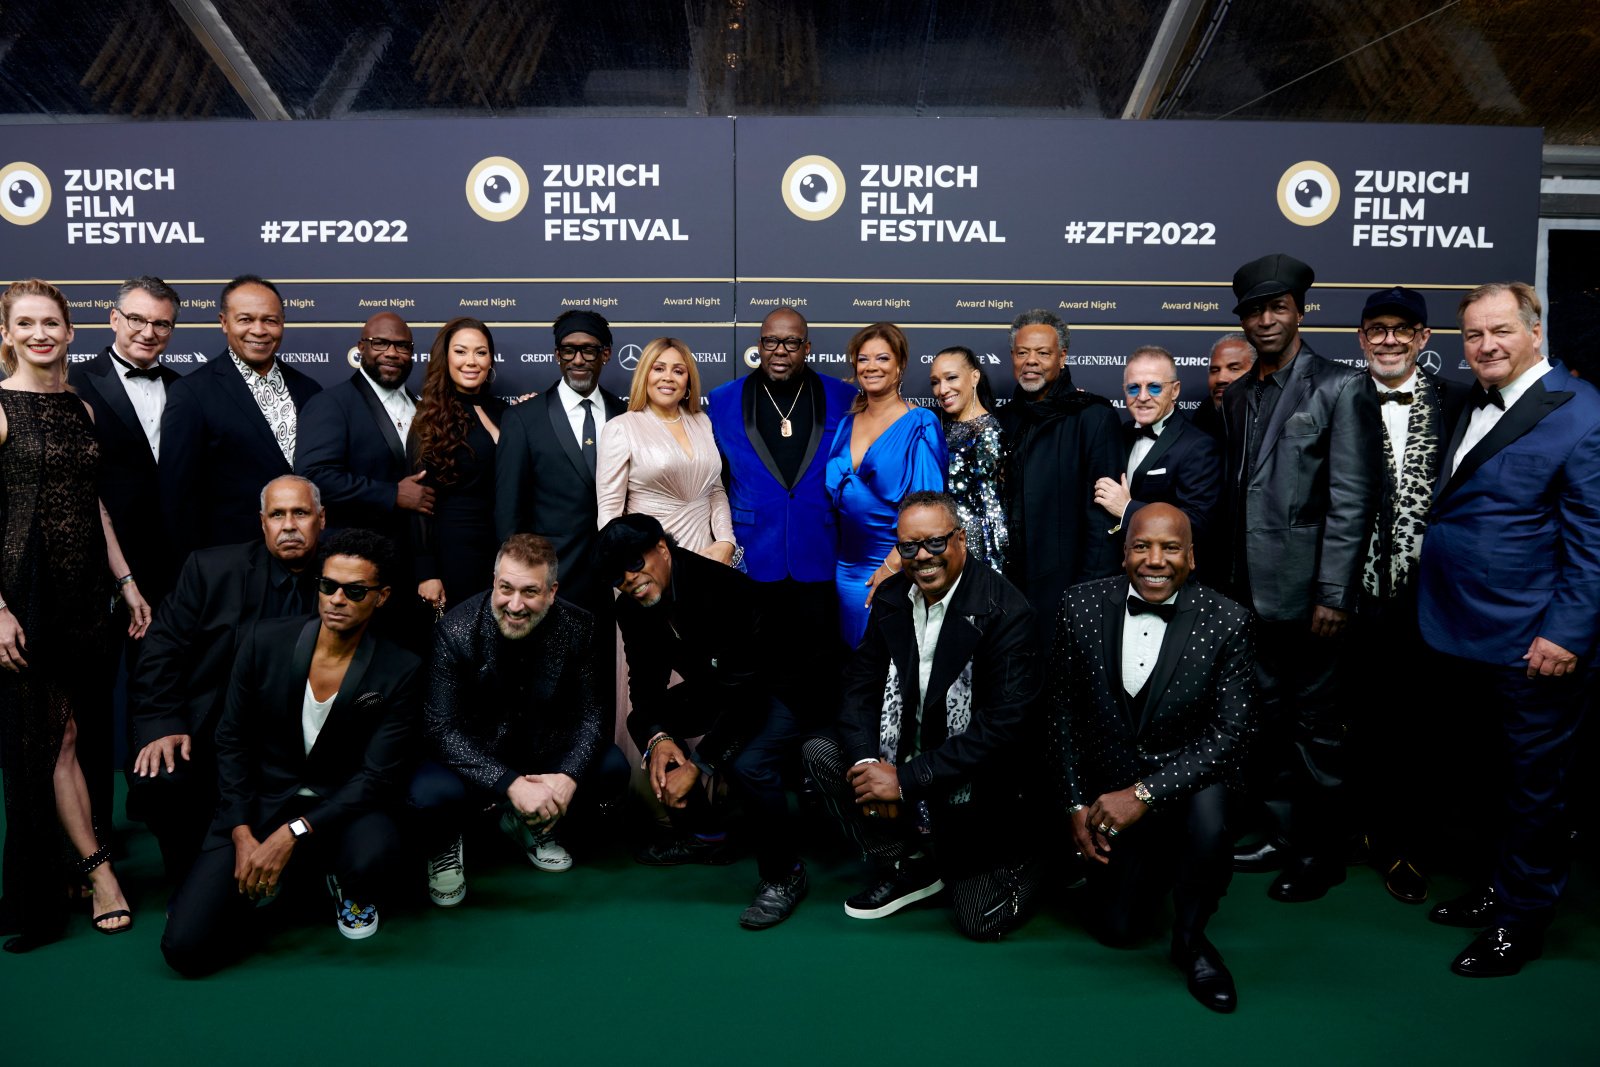 award-night_funky-claudes-all-star-band_opernhaus_pascal-bovey_for-zff.jpg